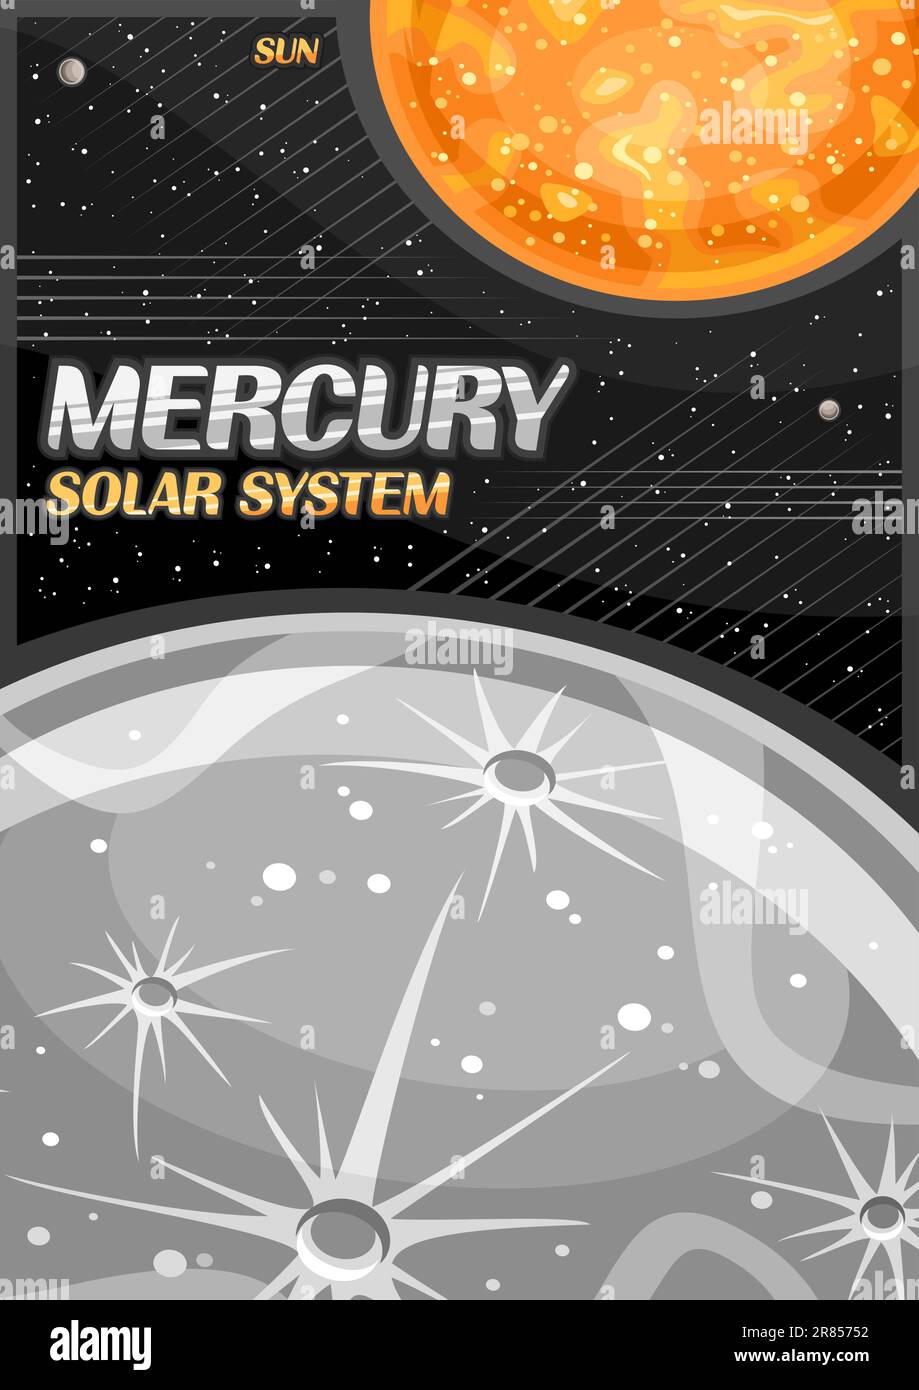 Vector Poster for Mercury, vertical banner with illustration of rotating stone mercury planet around cartoon sun on black starry background, decorativ Stock Vector